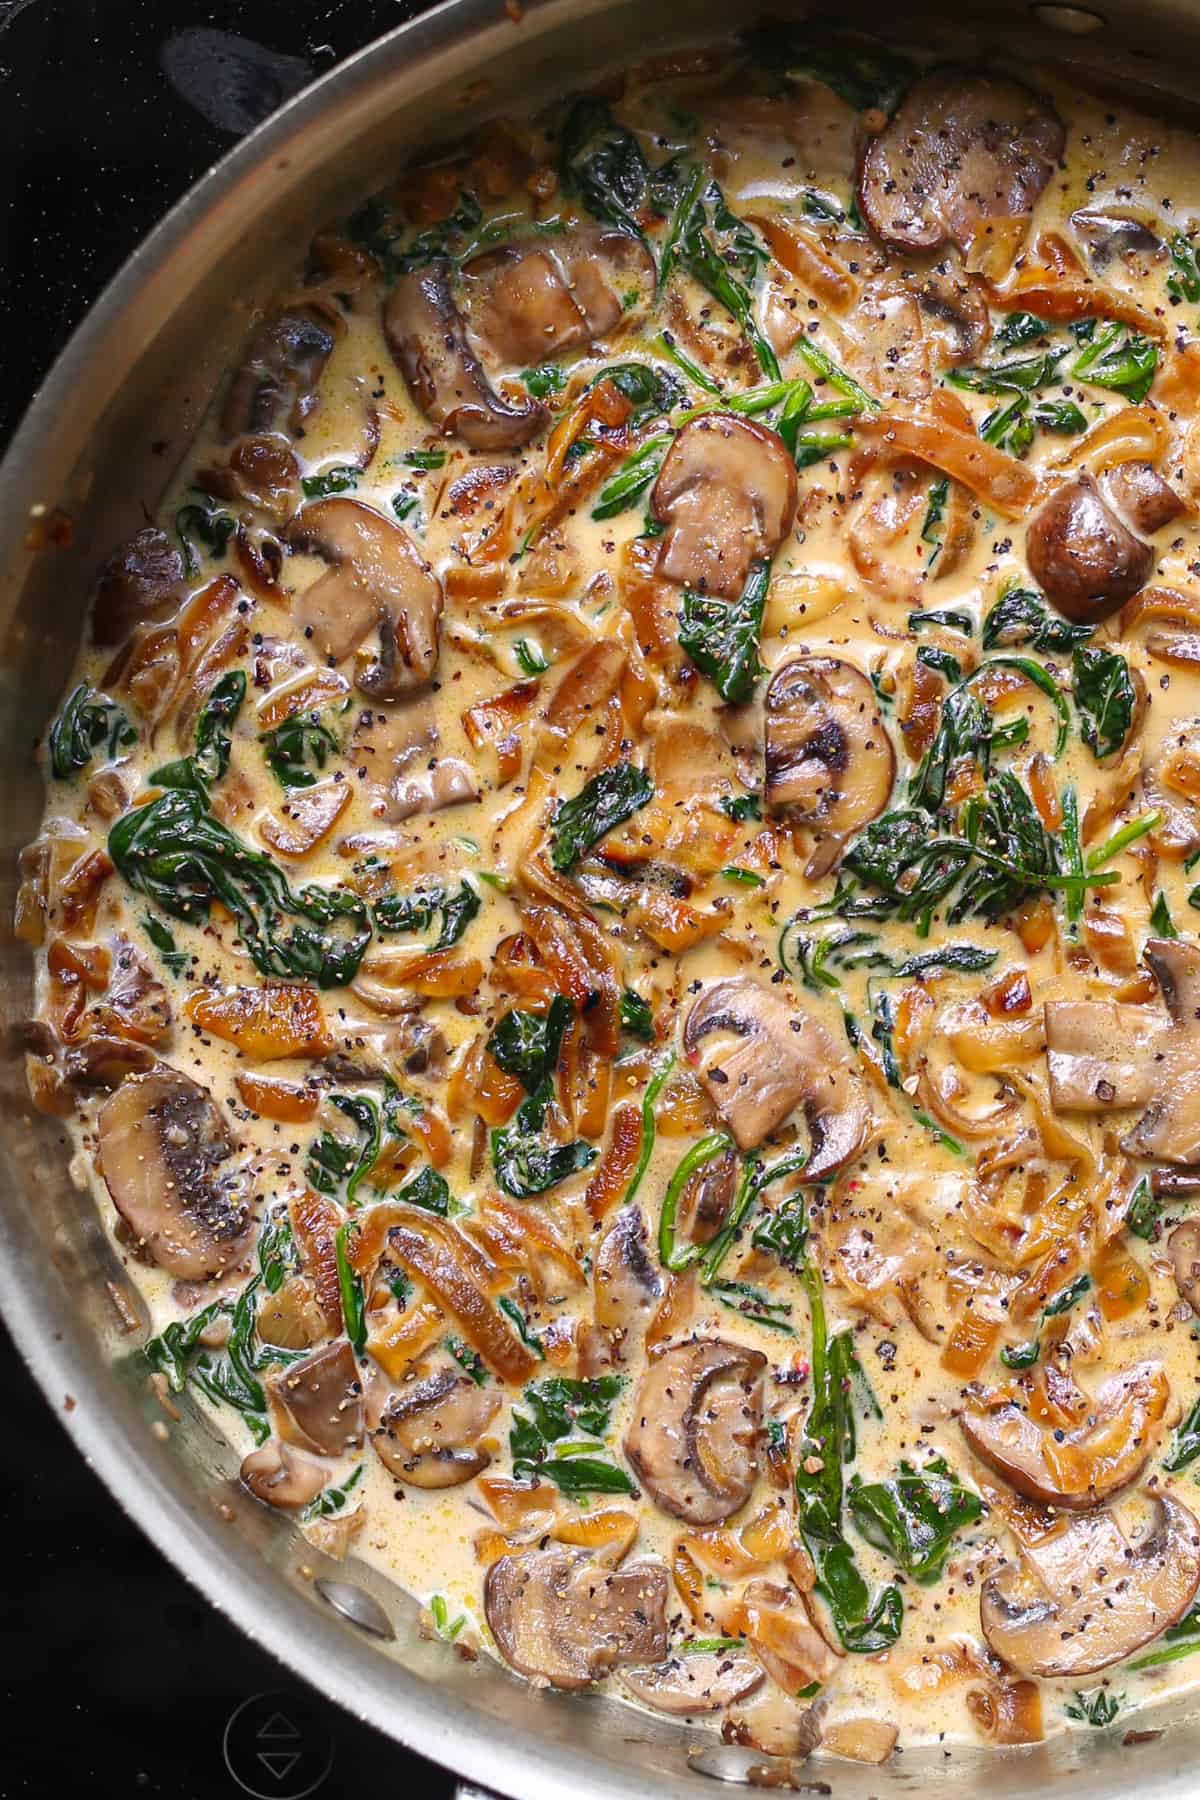 mushroom sauce with caramelized onions and spinach in a stainless steel pan.